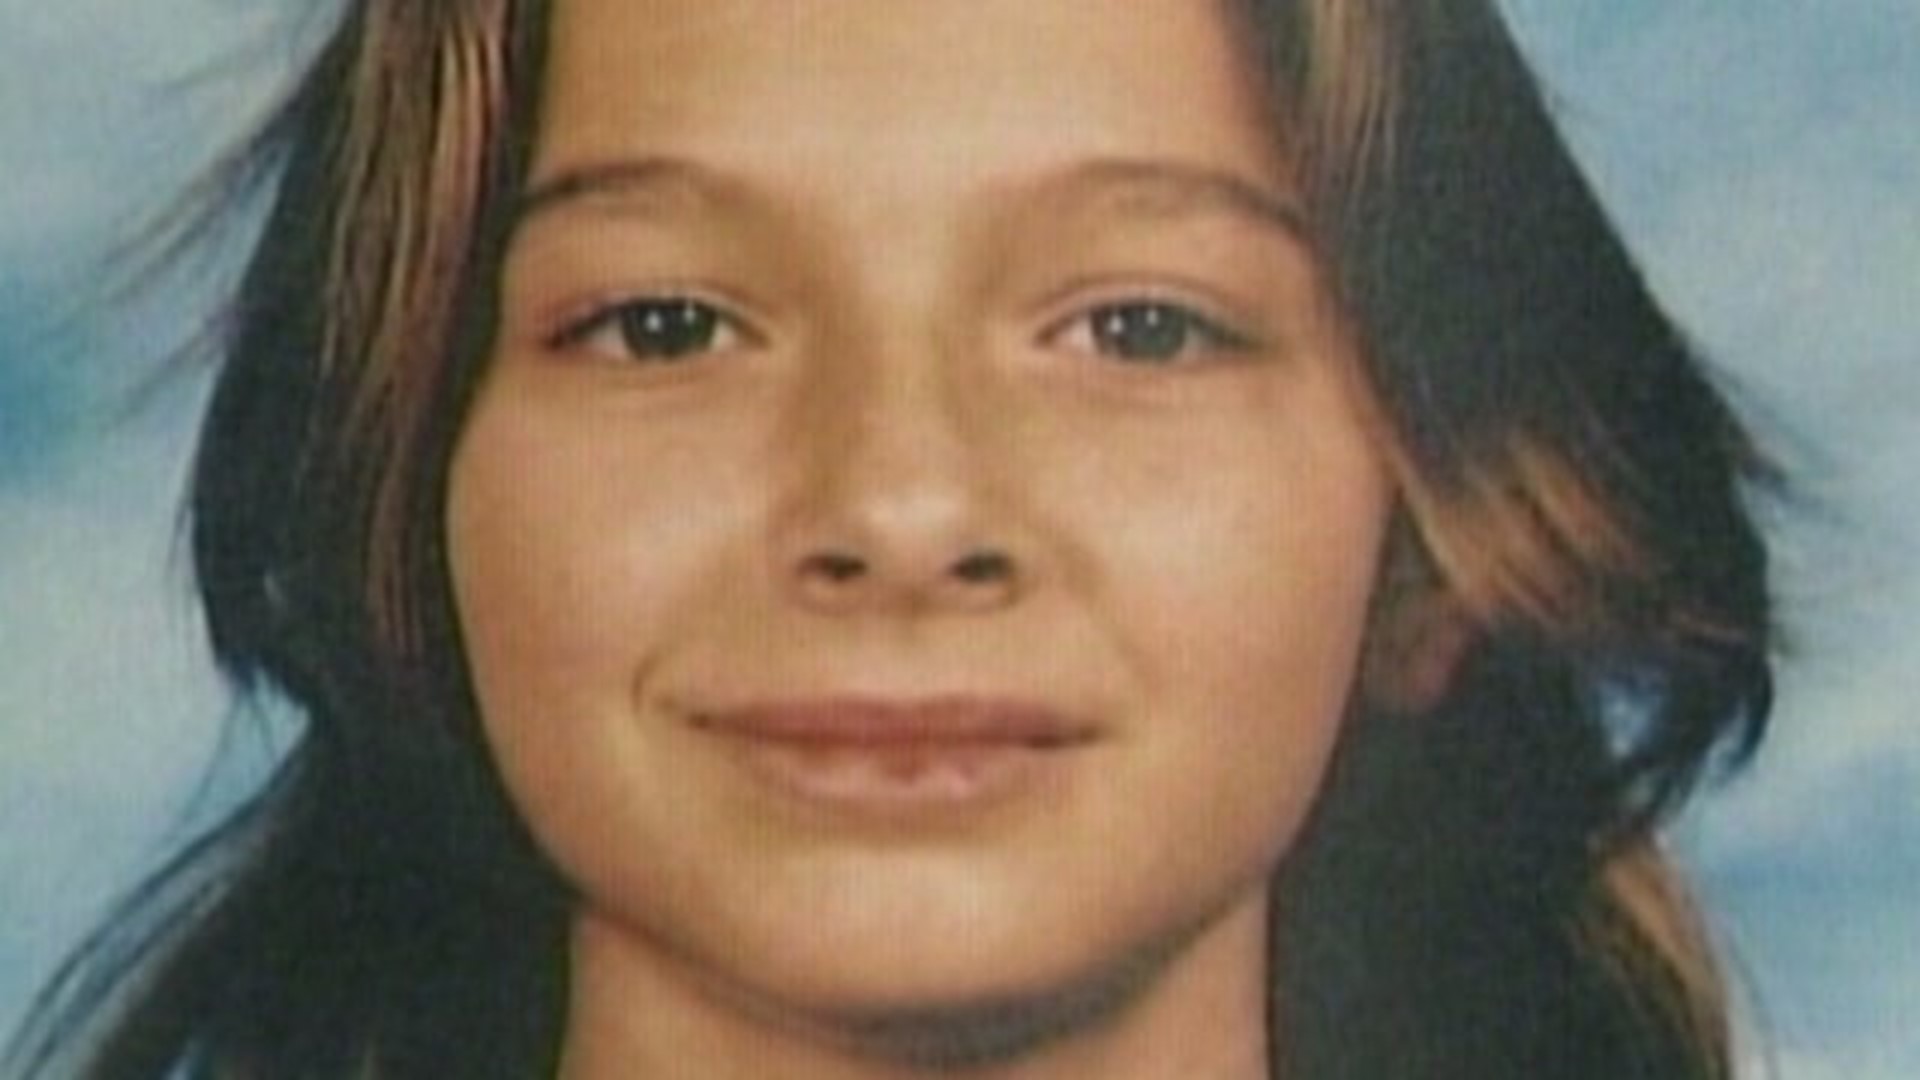 Friends need answers in Trudy Appleby disappearance